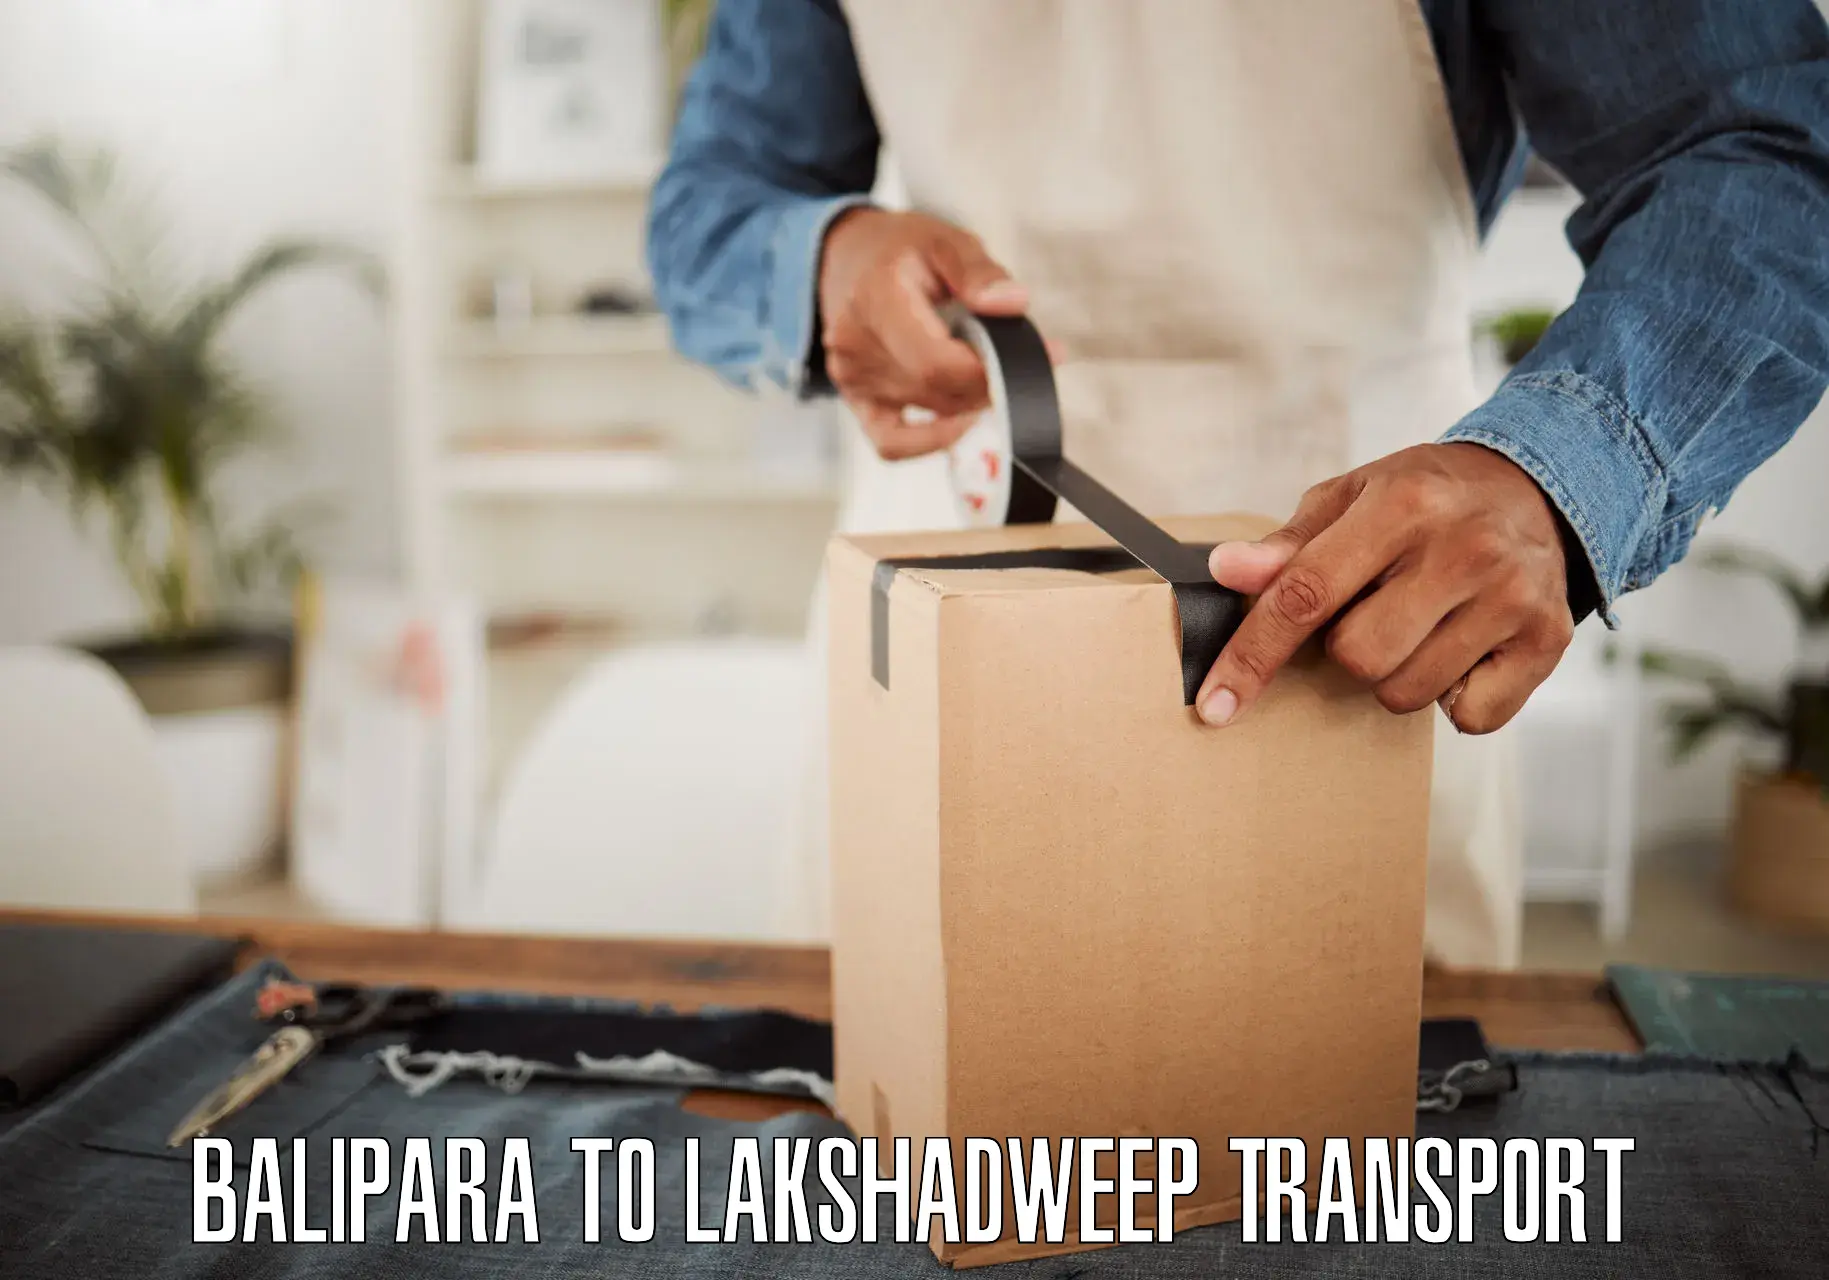 Transport bike from one state to another Balipara to Lakshadweep